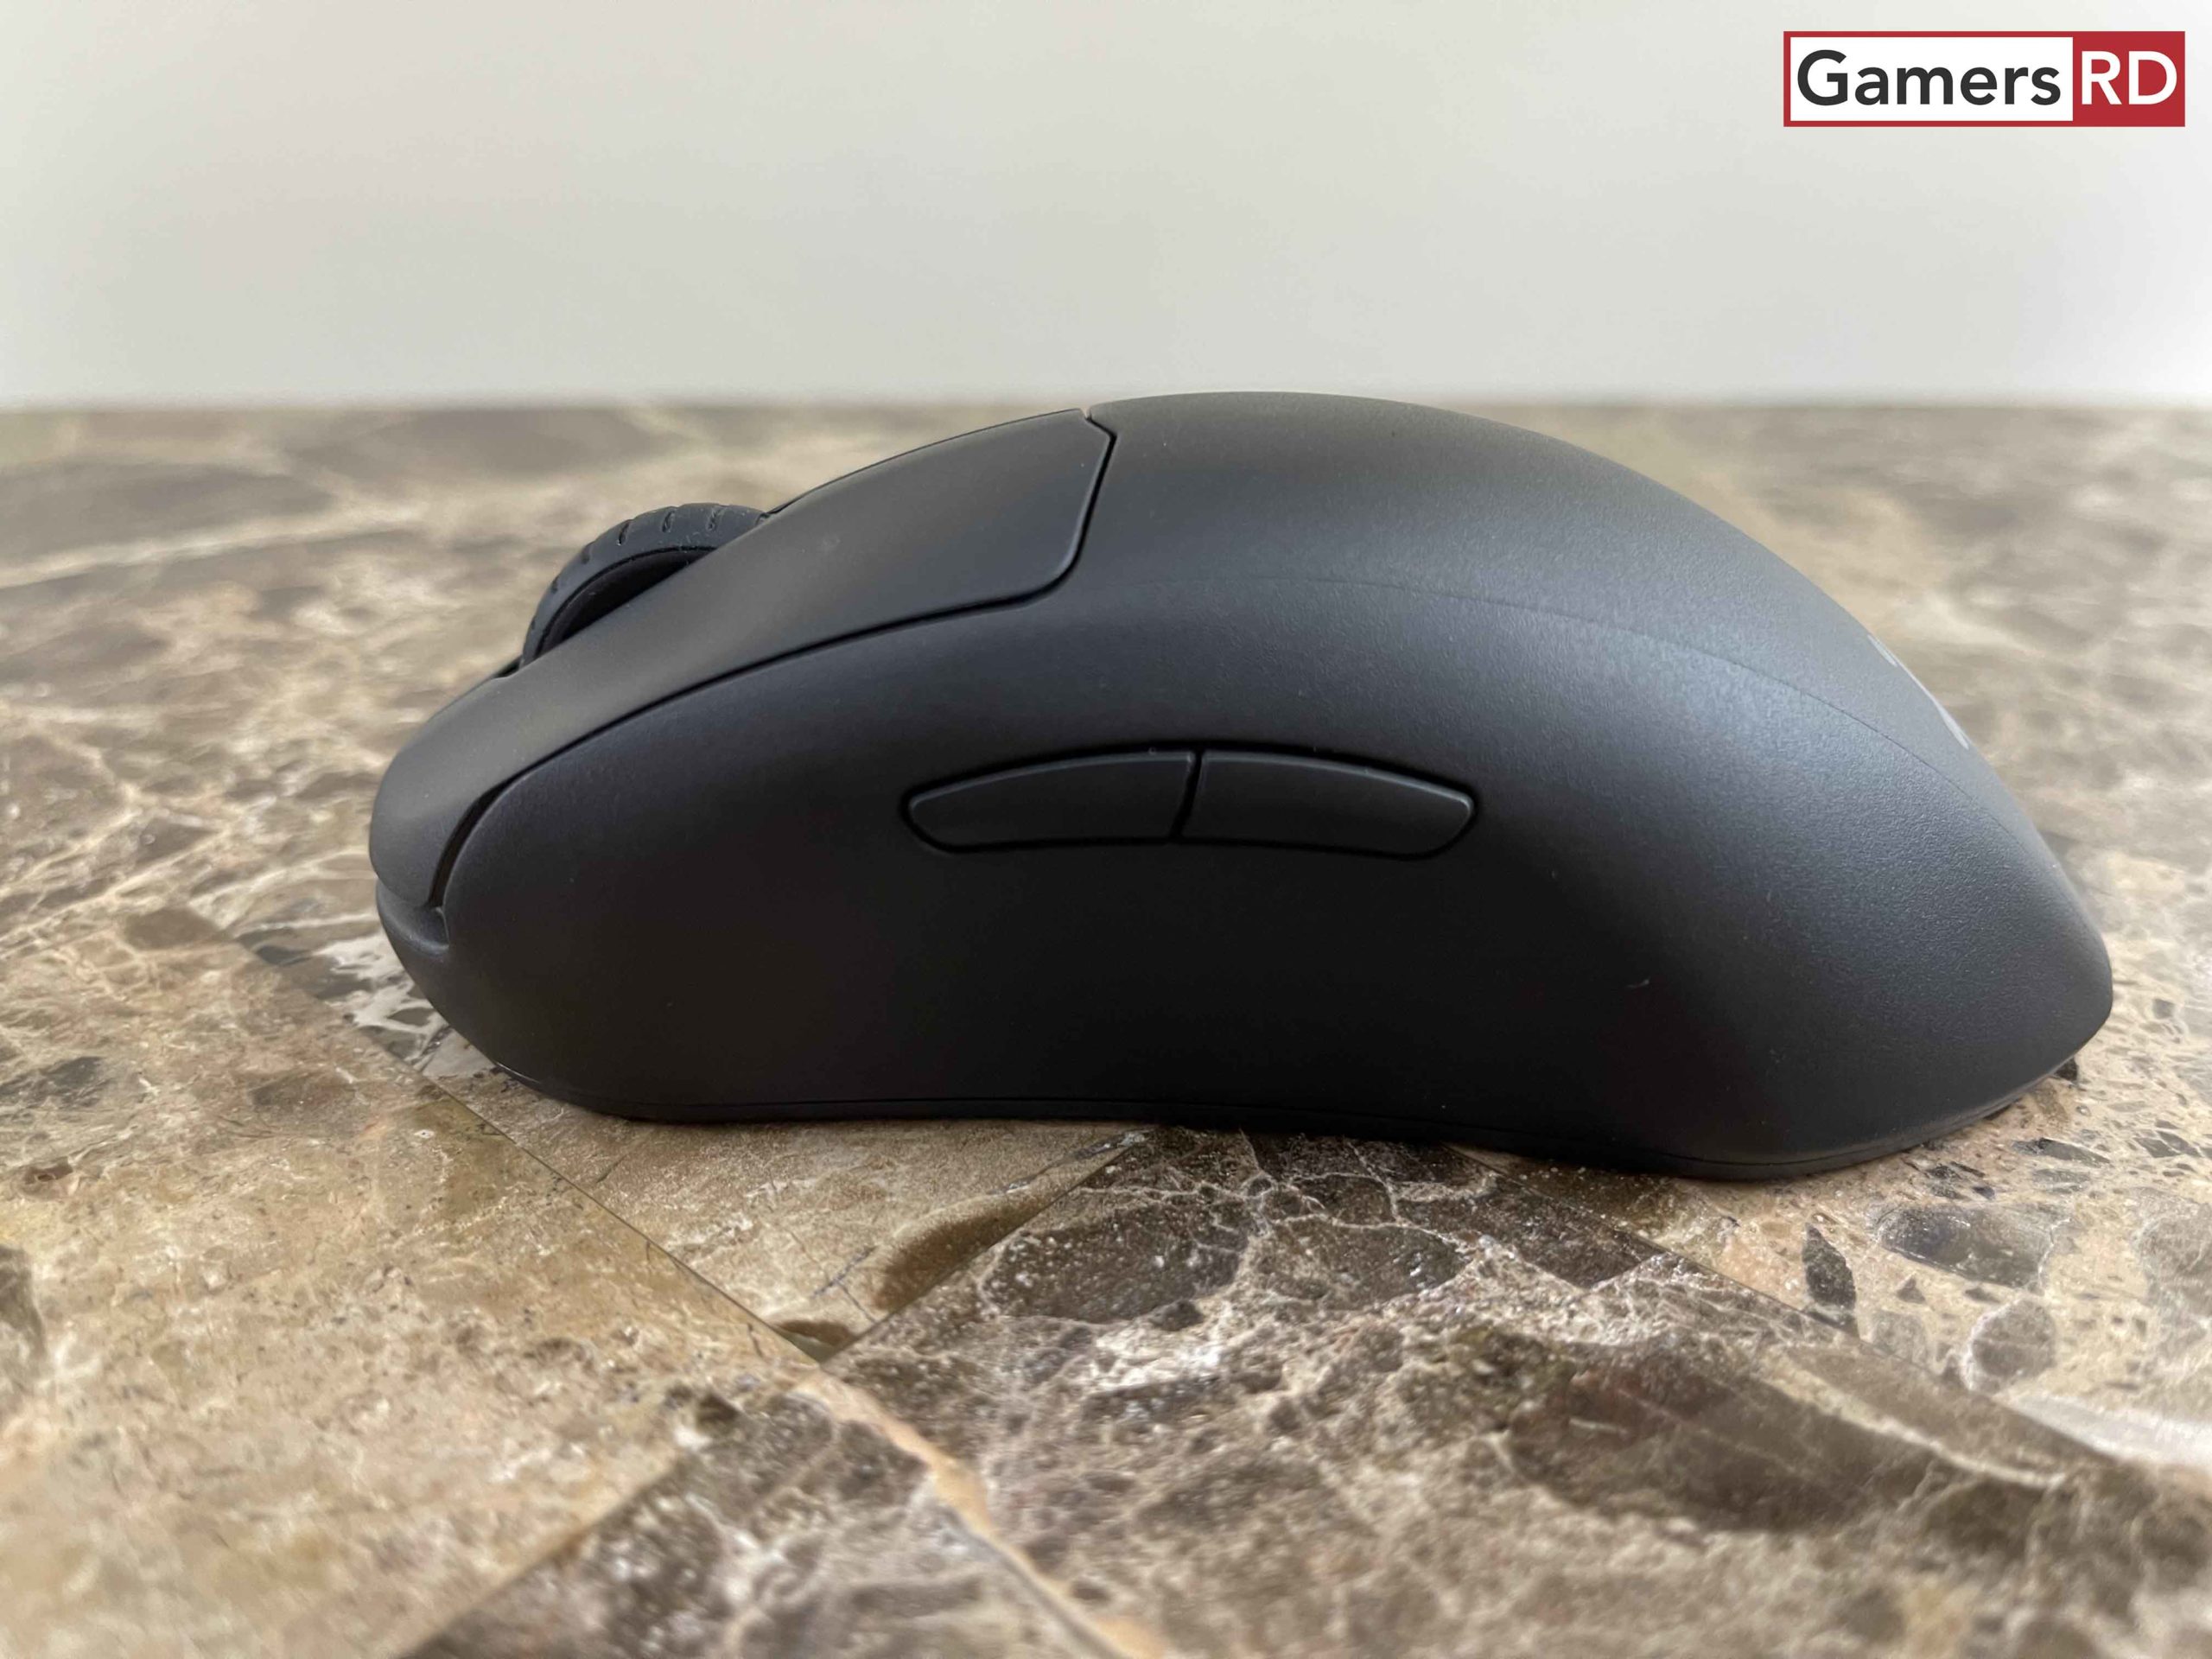 SteelSeries Prime + Gaming Mouse 2 Review